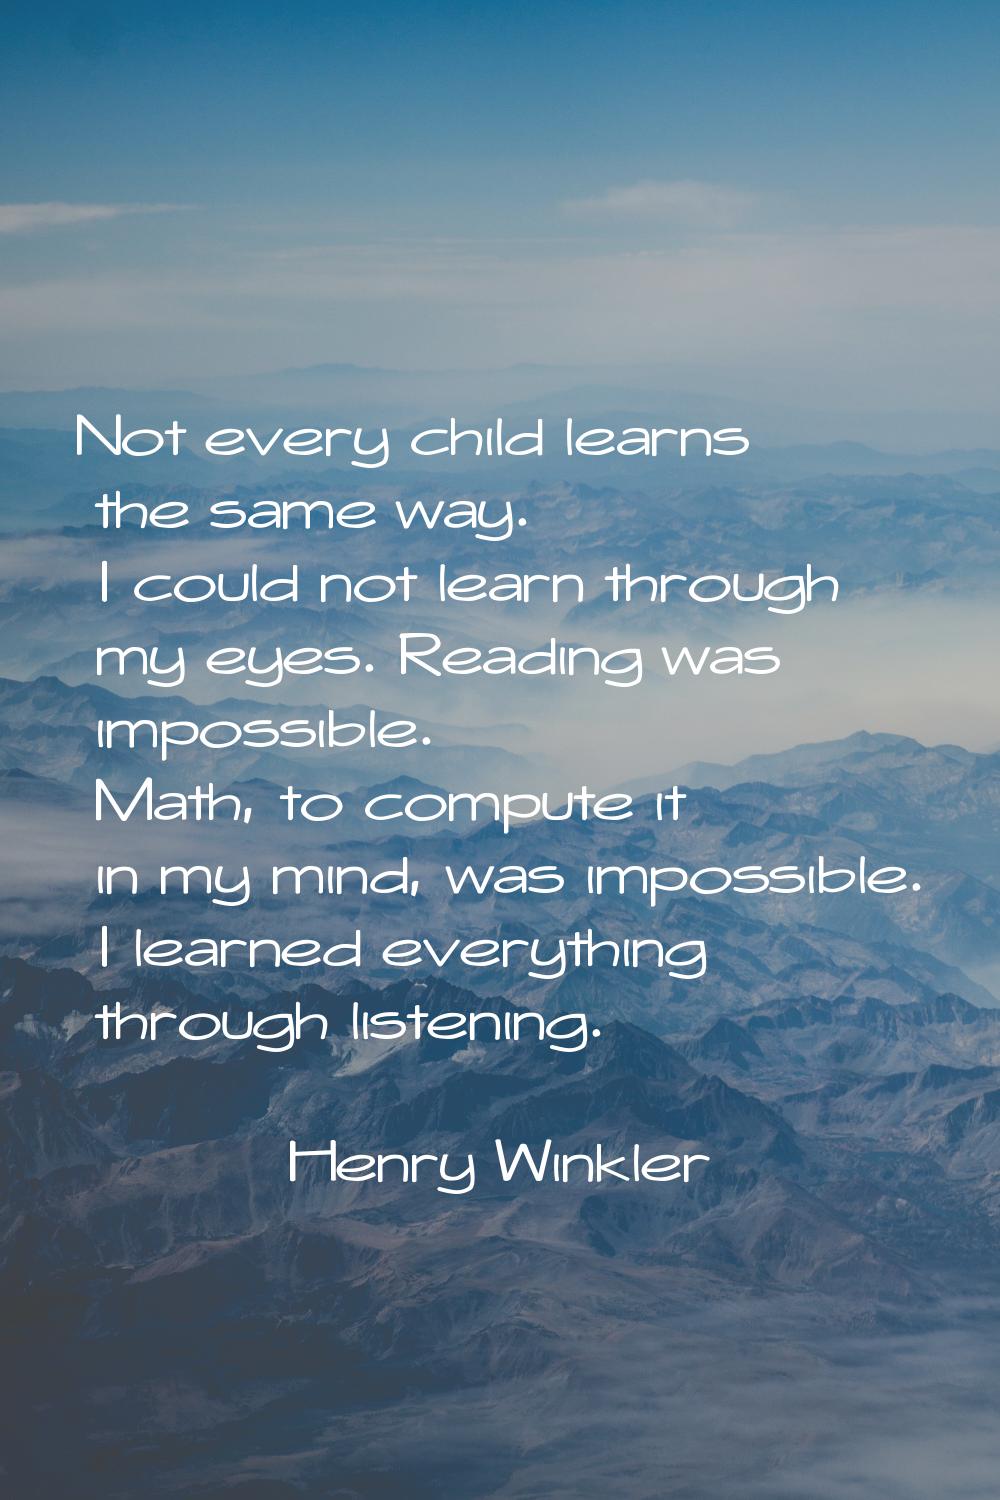 Not every child learns the same way. I could not learn through my eyes. Reading was impossible. Mat